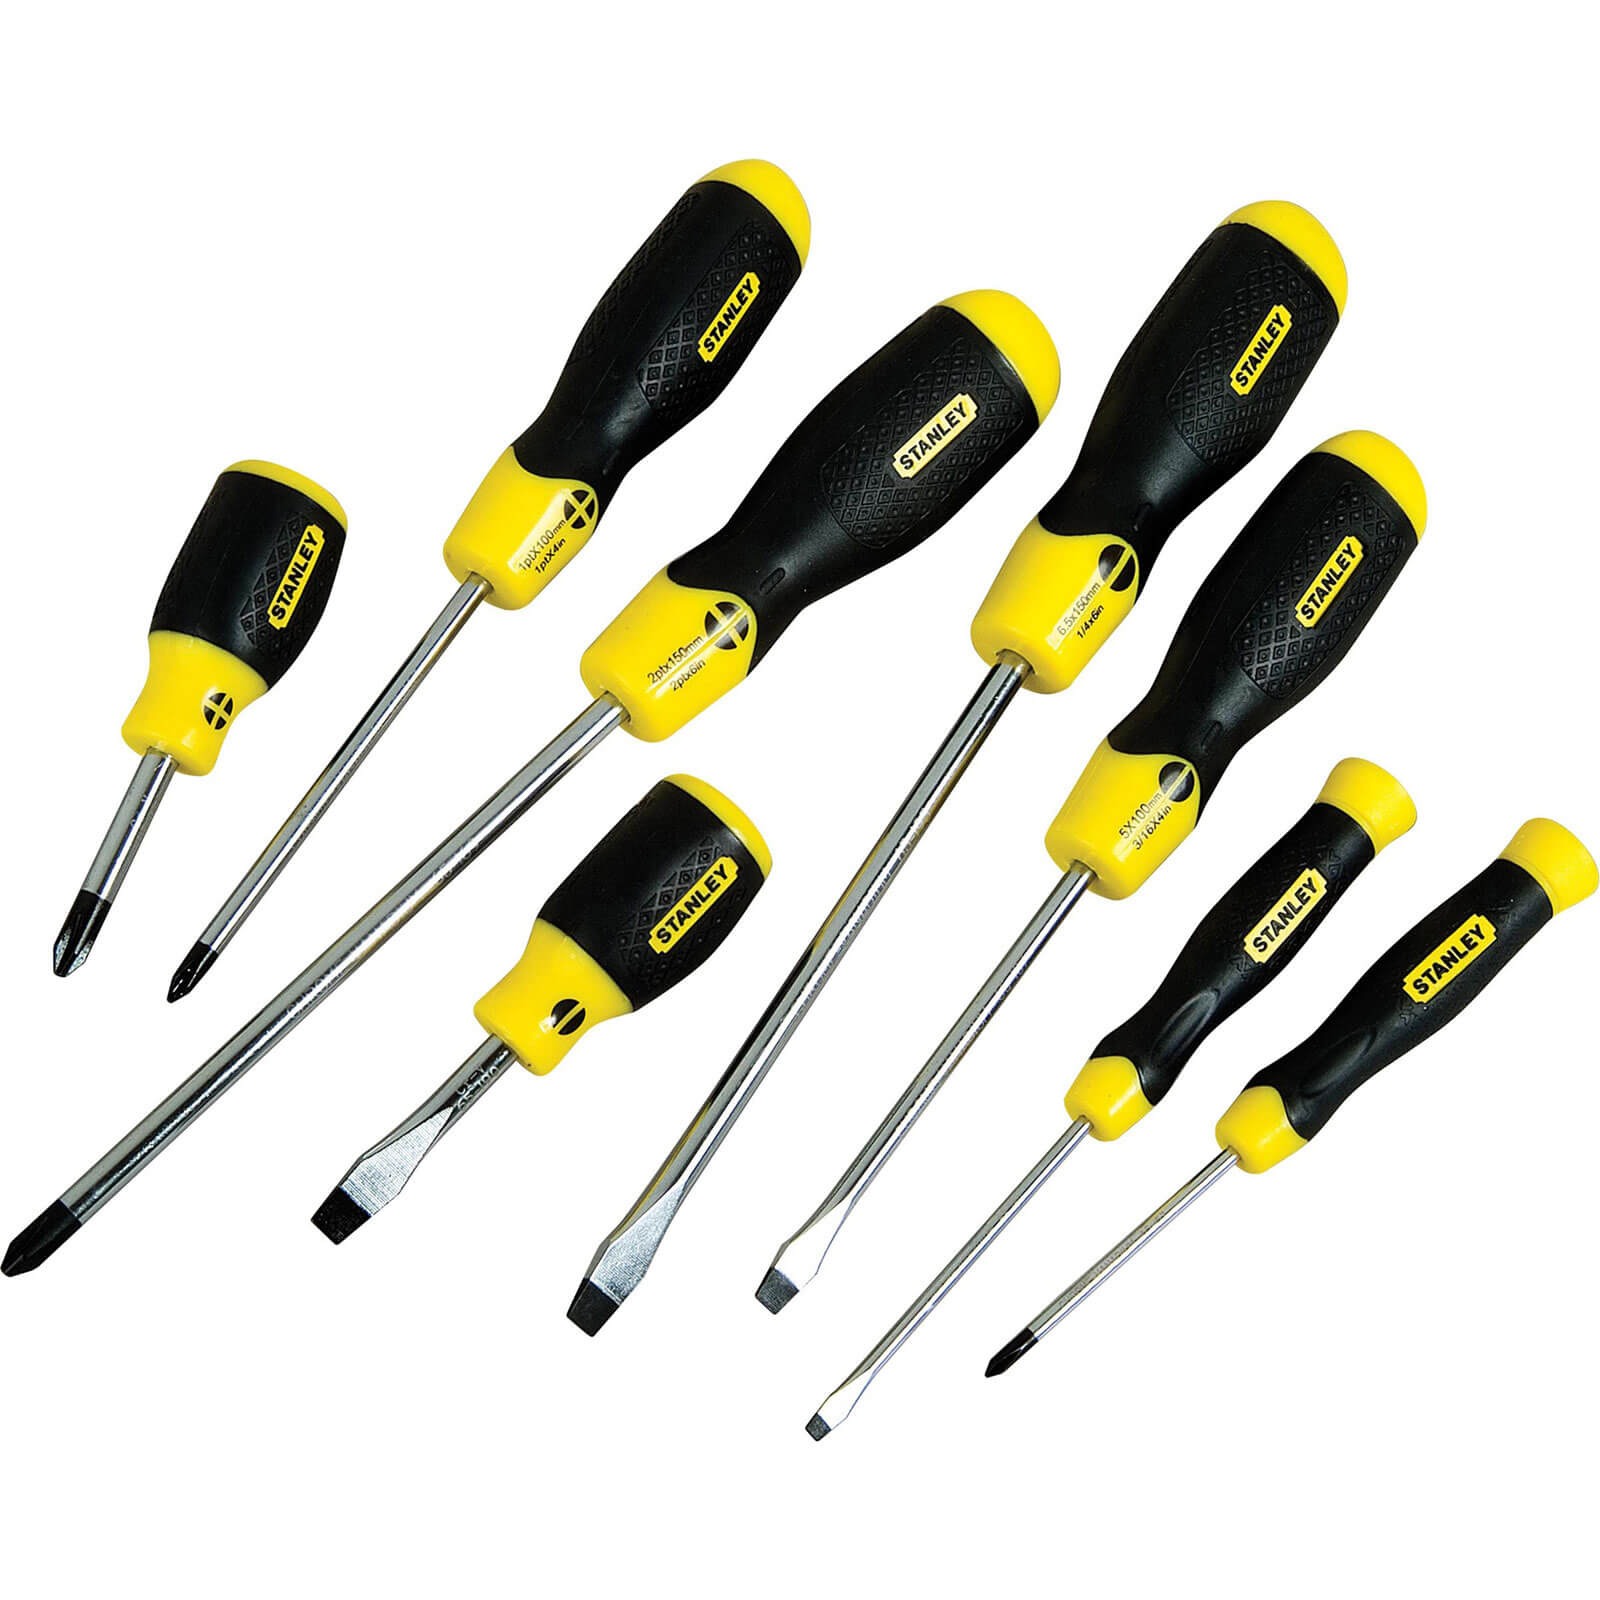 Image of Stanley 8 Piece Cushion Grip Phillips and Slotted Screwdriver Set